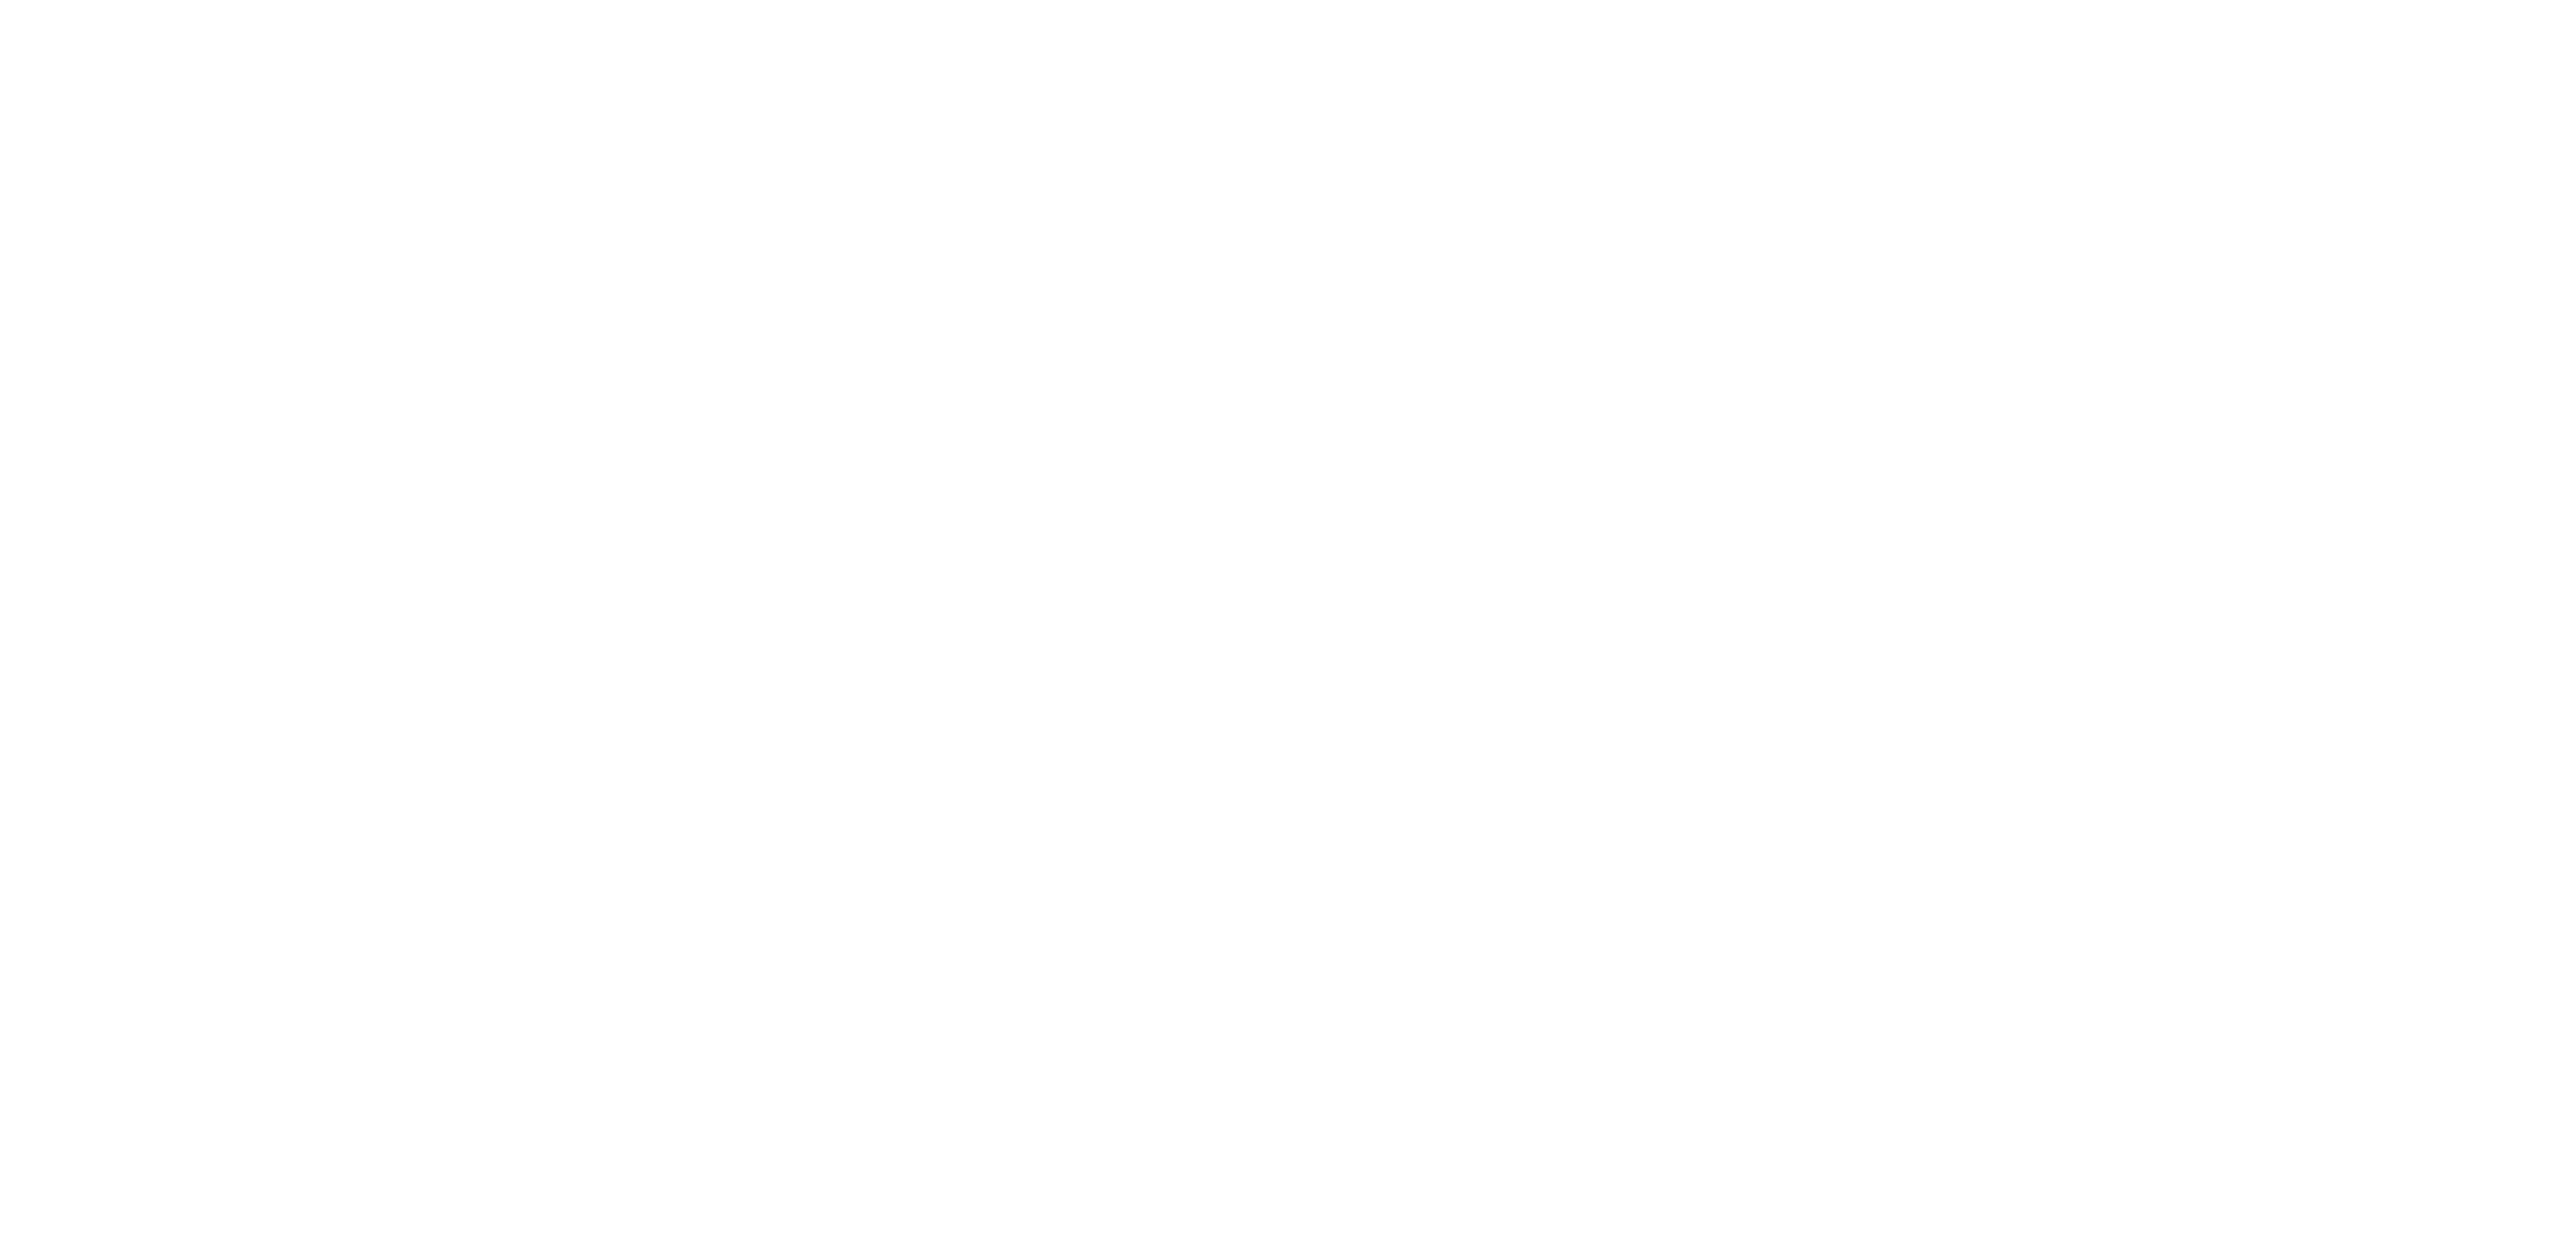 being atttached ideal parent figures protocol White-01